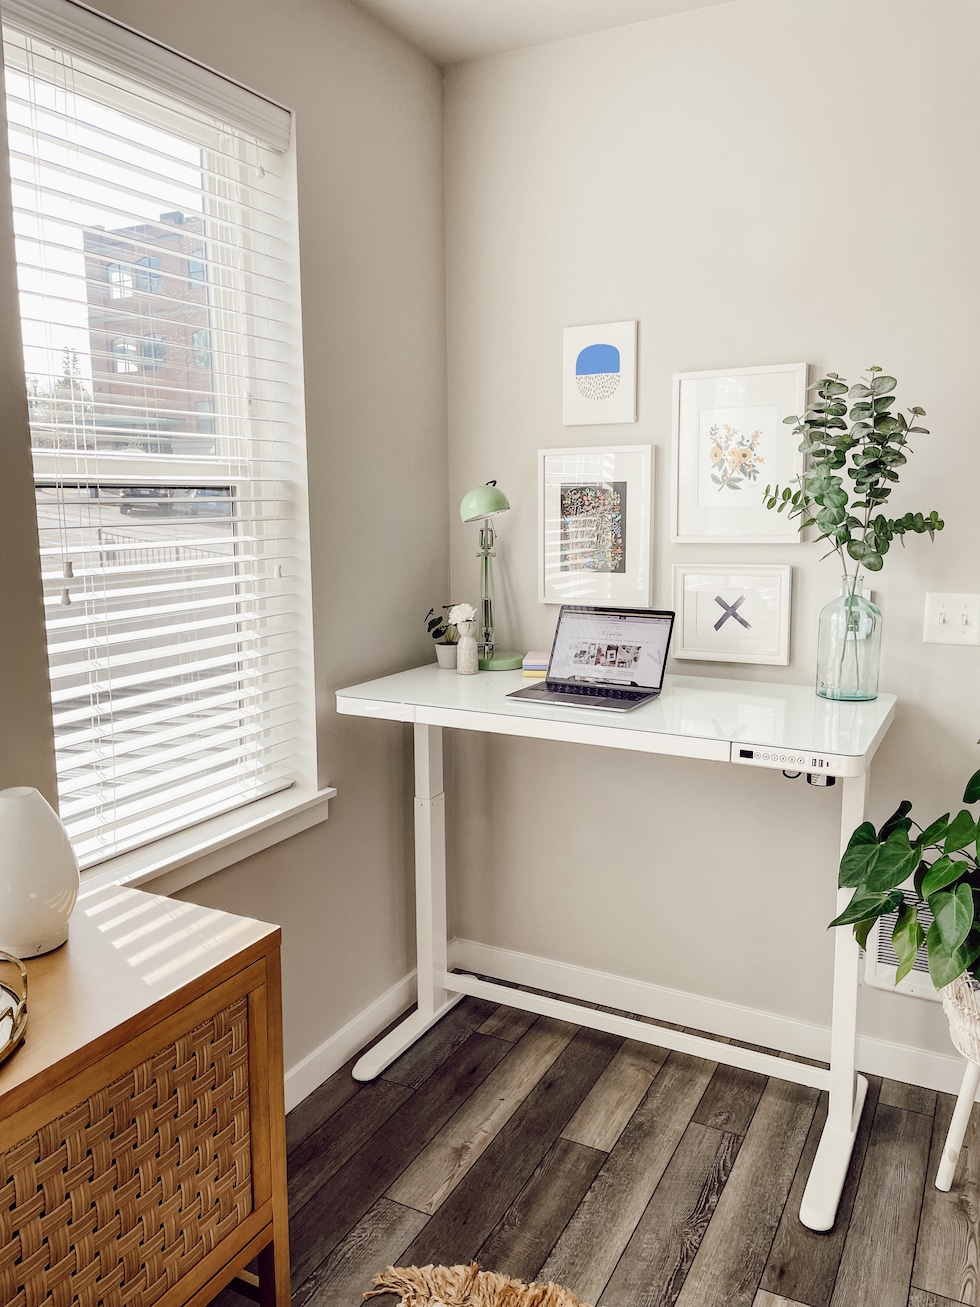 Standing Desk for Working from Home in a Small Space - The Inspired Room